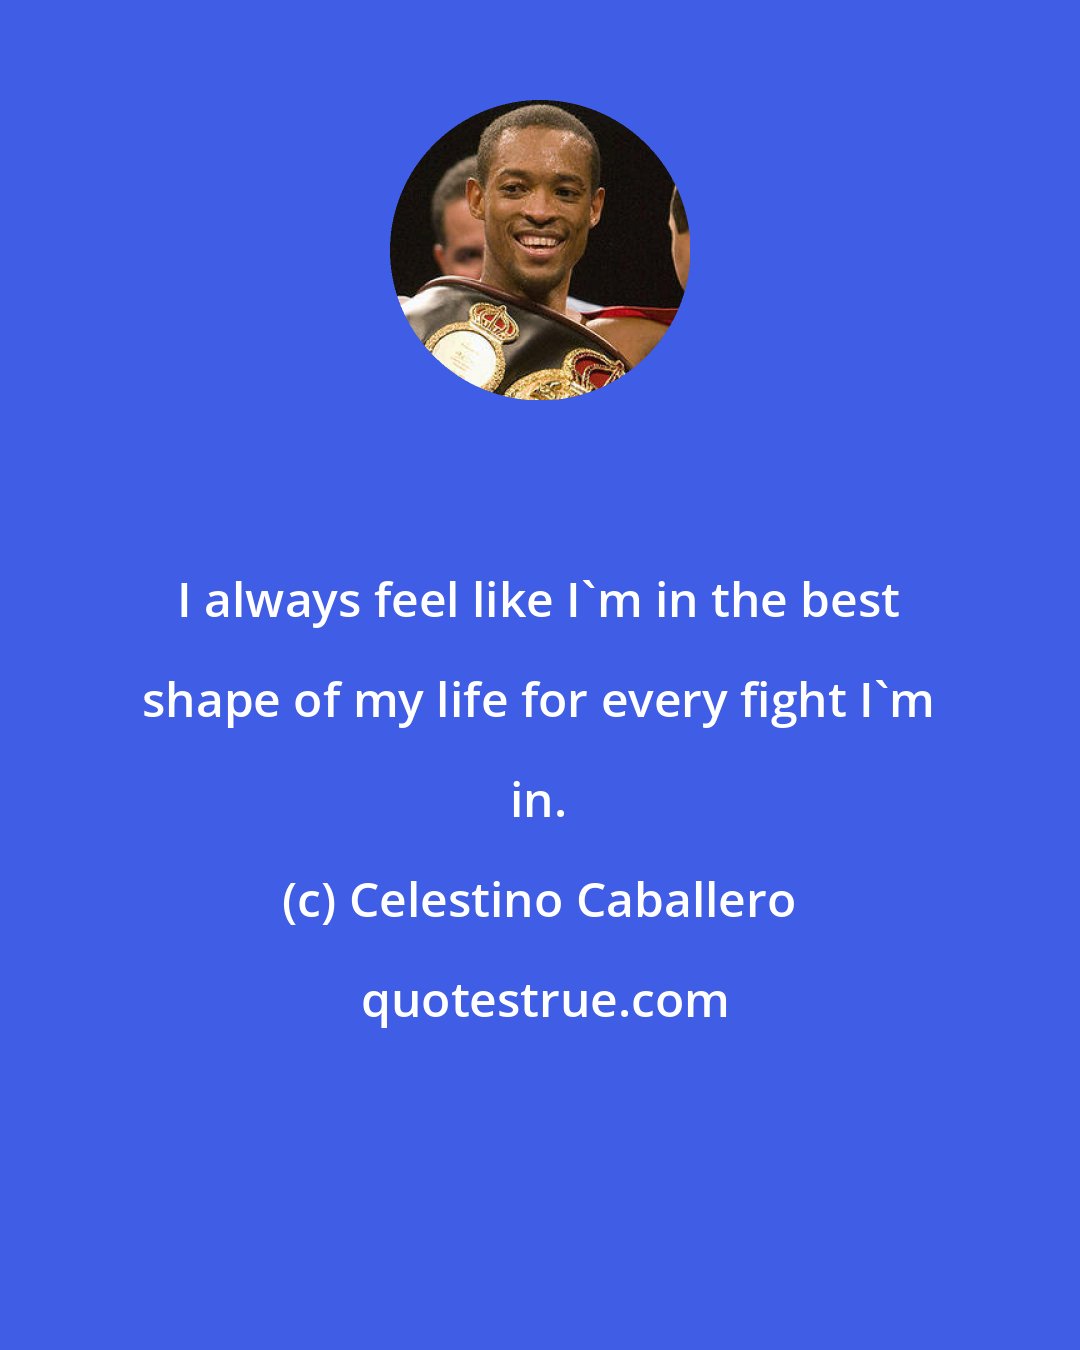 Celestino Caballero: I always feel like I'm in the best shape of my life for every fight I'm in.